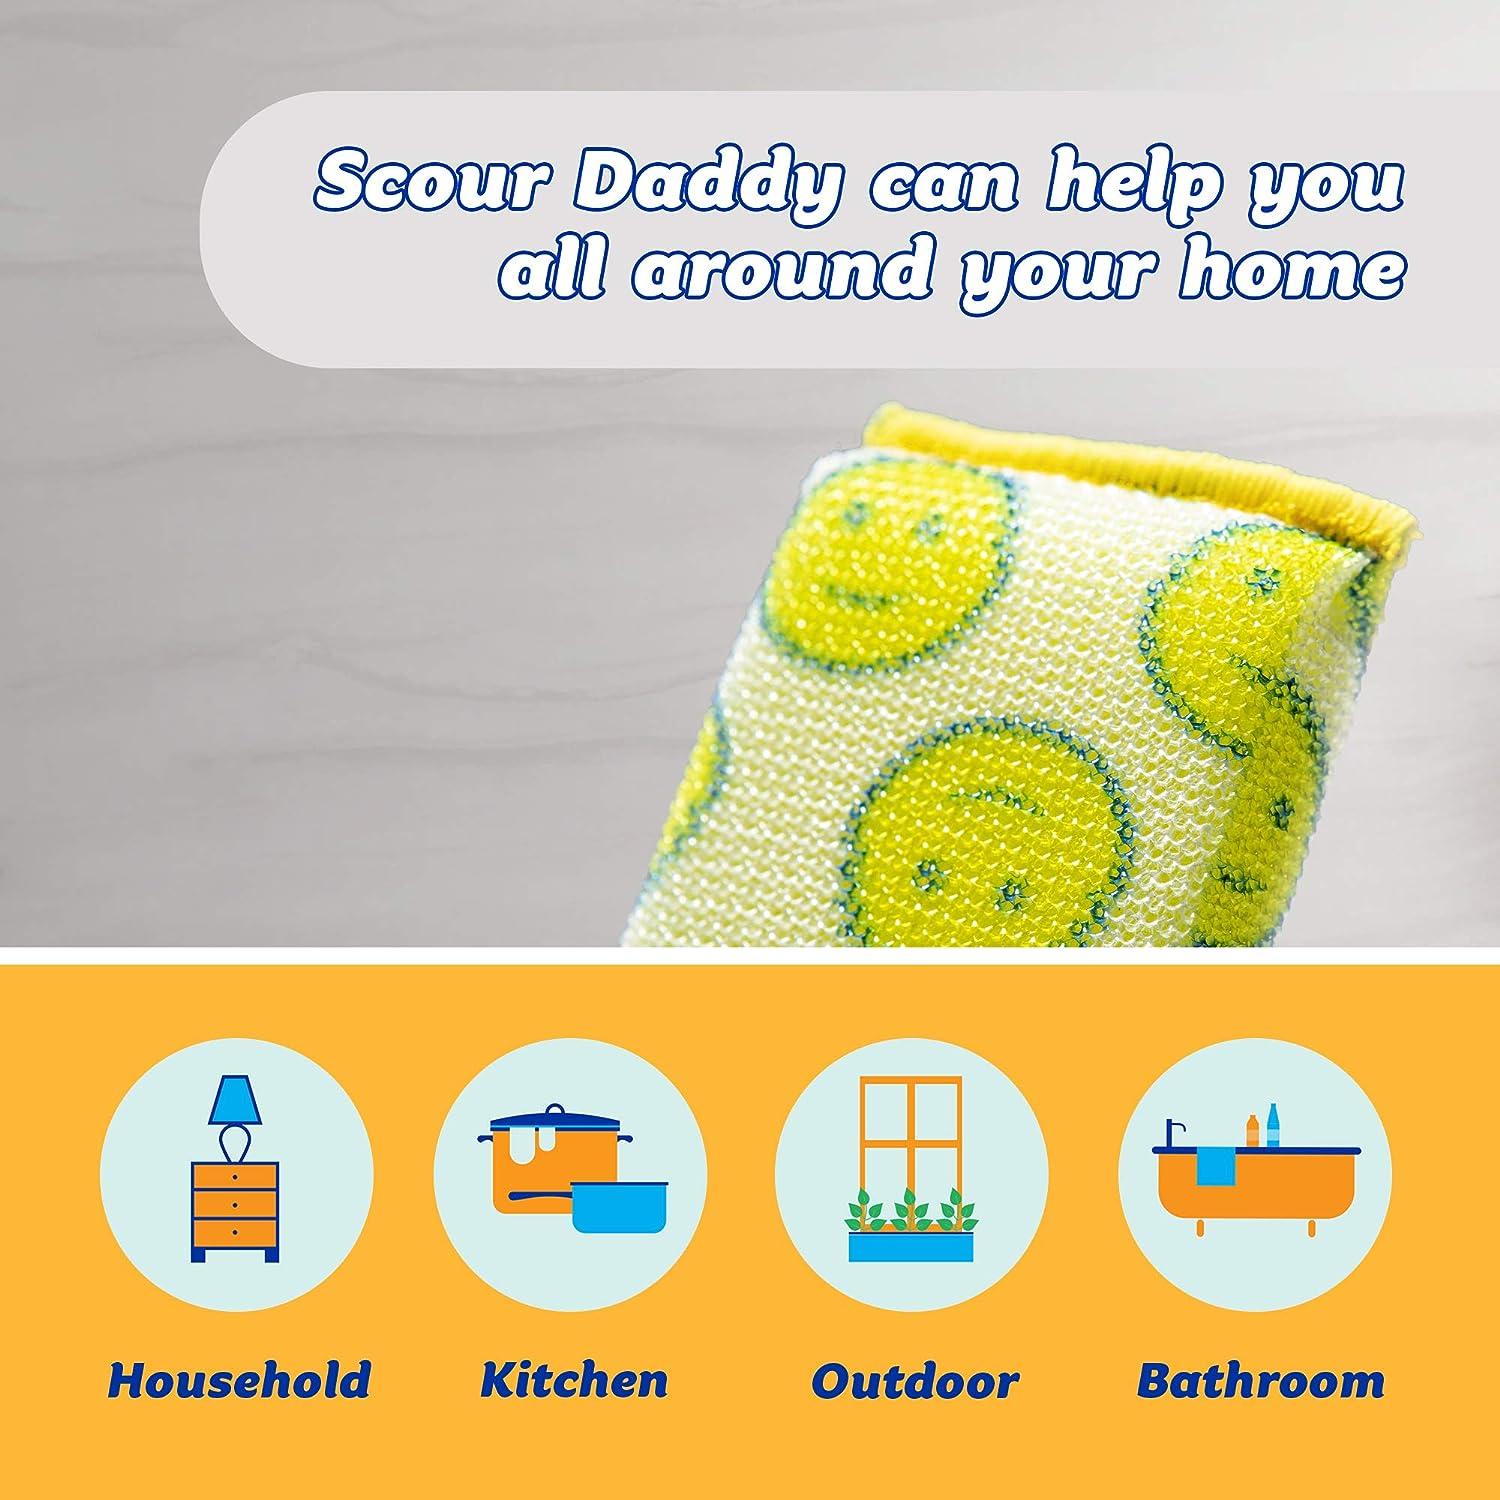 Scrub Daddy Steel Scour Pads - Scour Daddy Steel - Stainless Steel Scouring  Pads for Dishes, Pots, Pans and Grill, Scrubbers for Kitchen and Bathroom